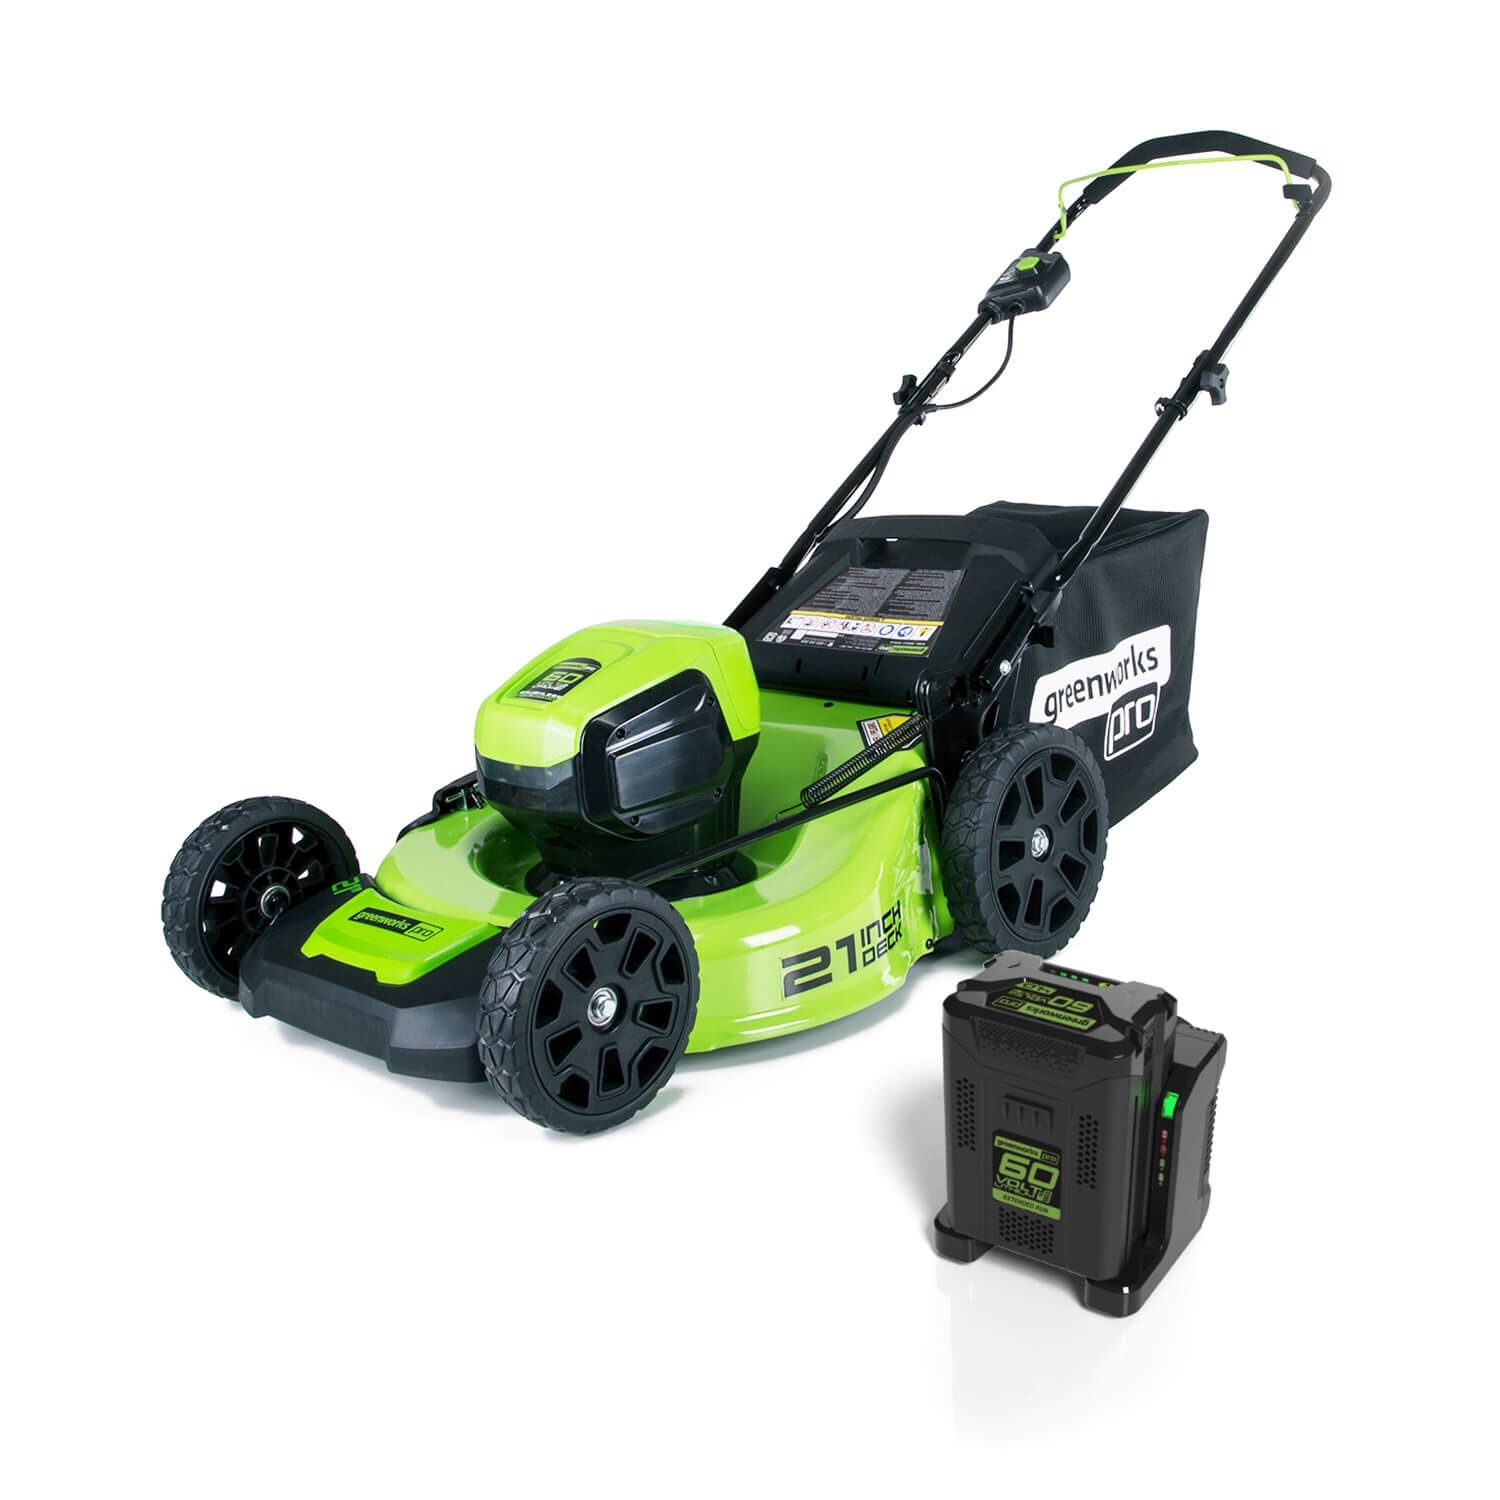 Greenworks Pro Brushless Lawn mower + 2 BATTERIES INCLUDED